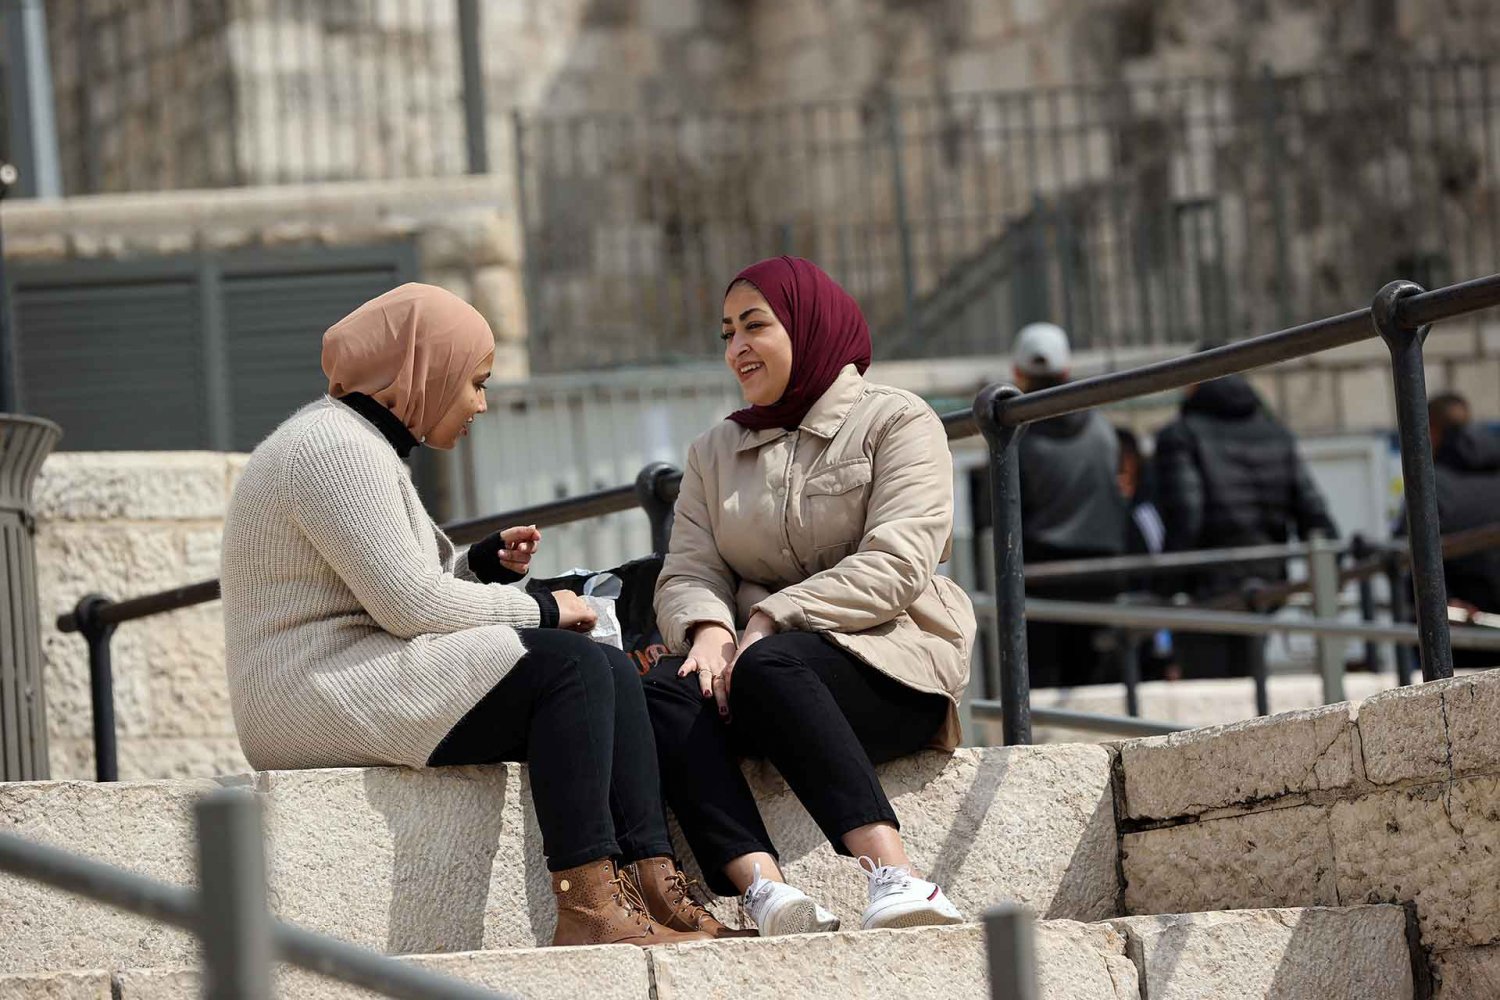 Two Palestinian women chat on the plaza steps of Damascus Gate, February 2021.